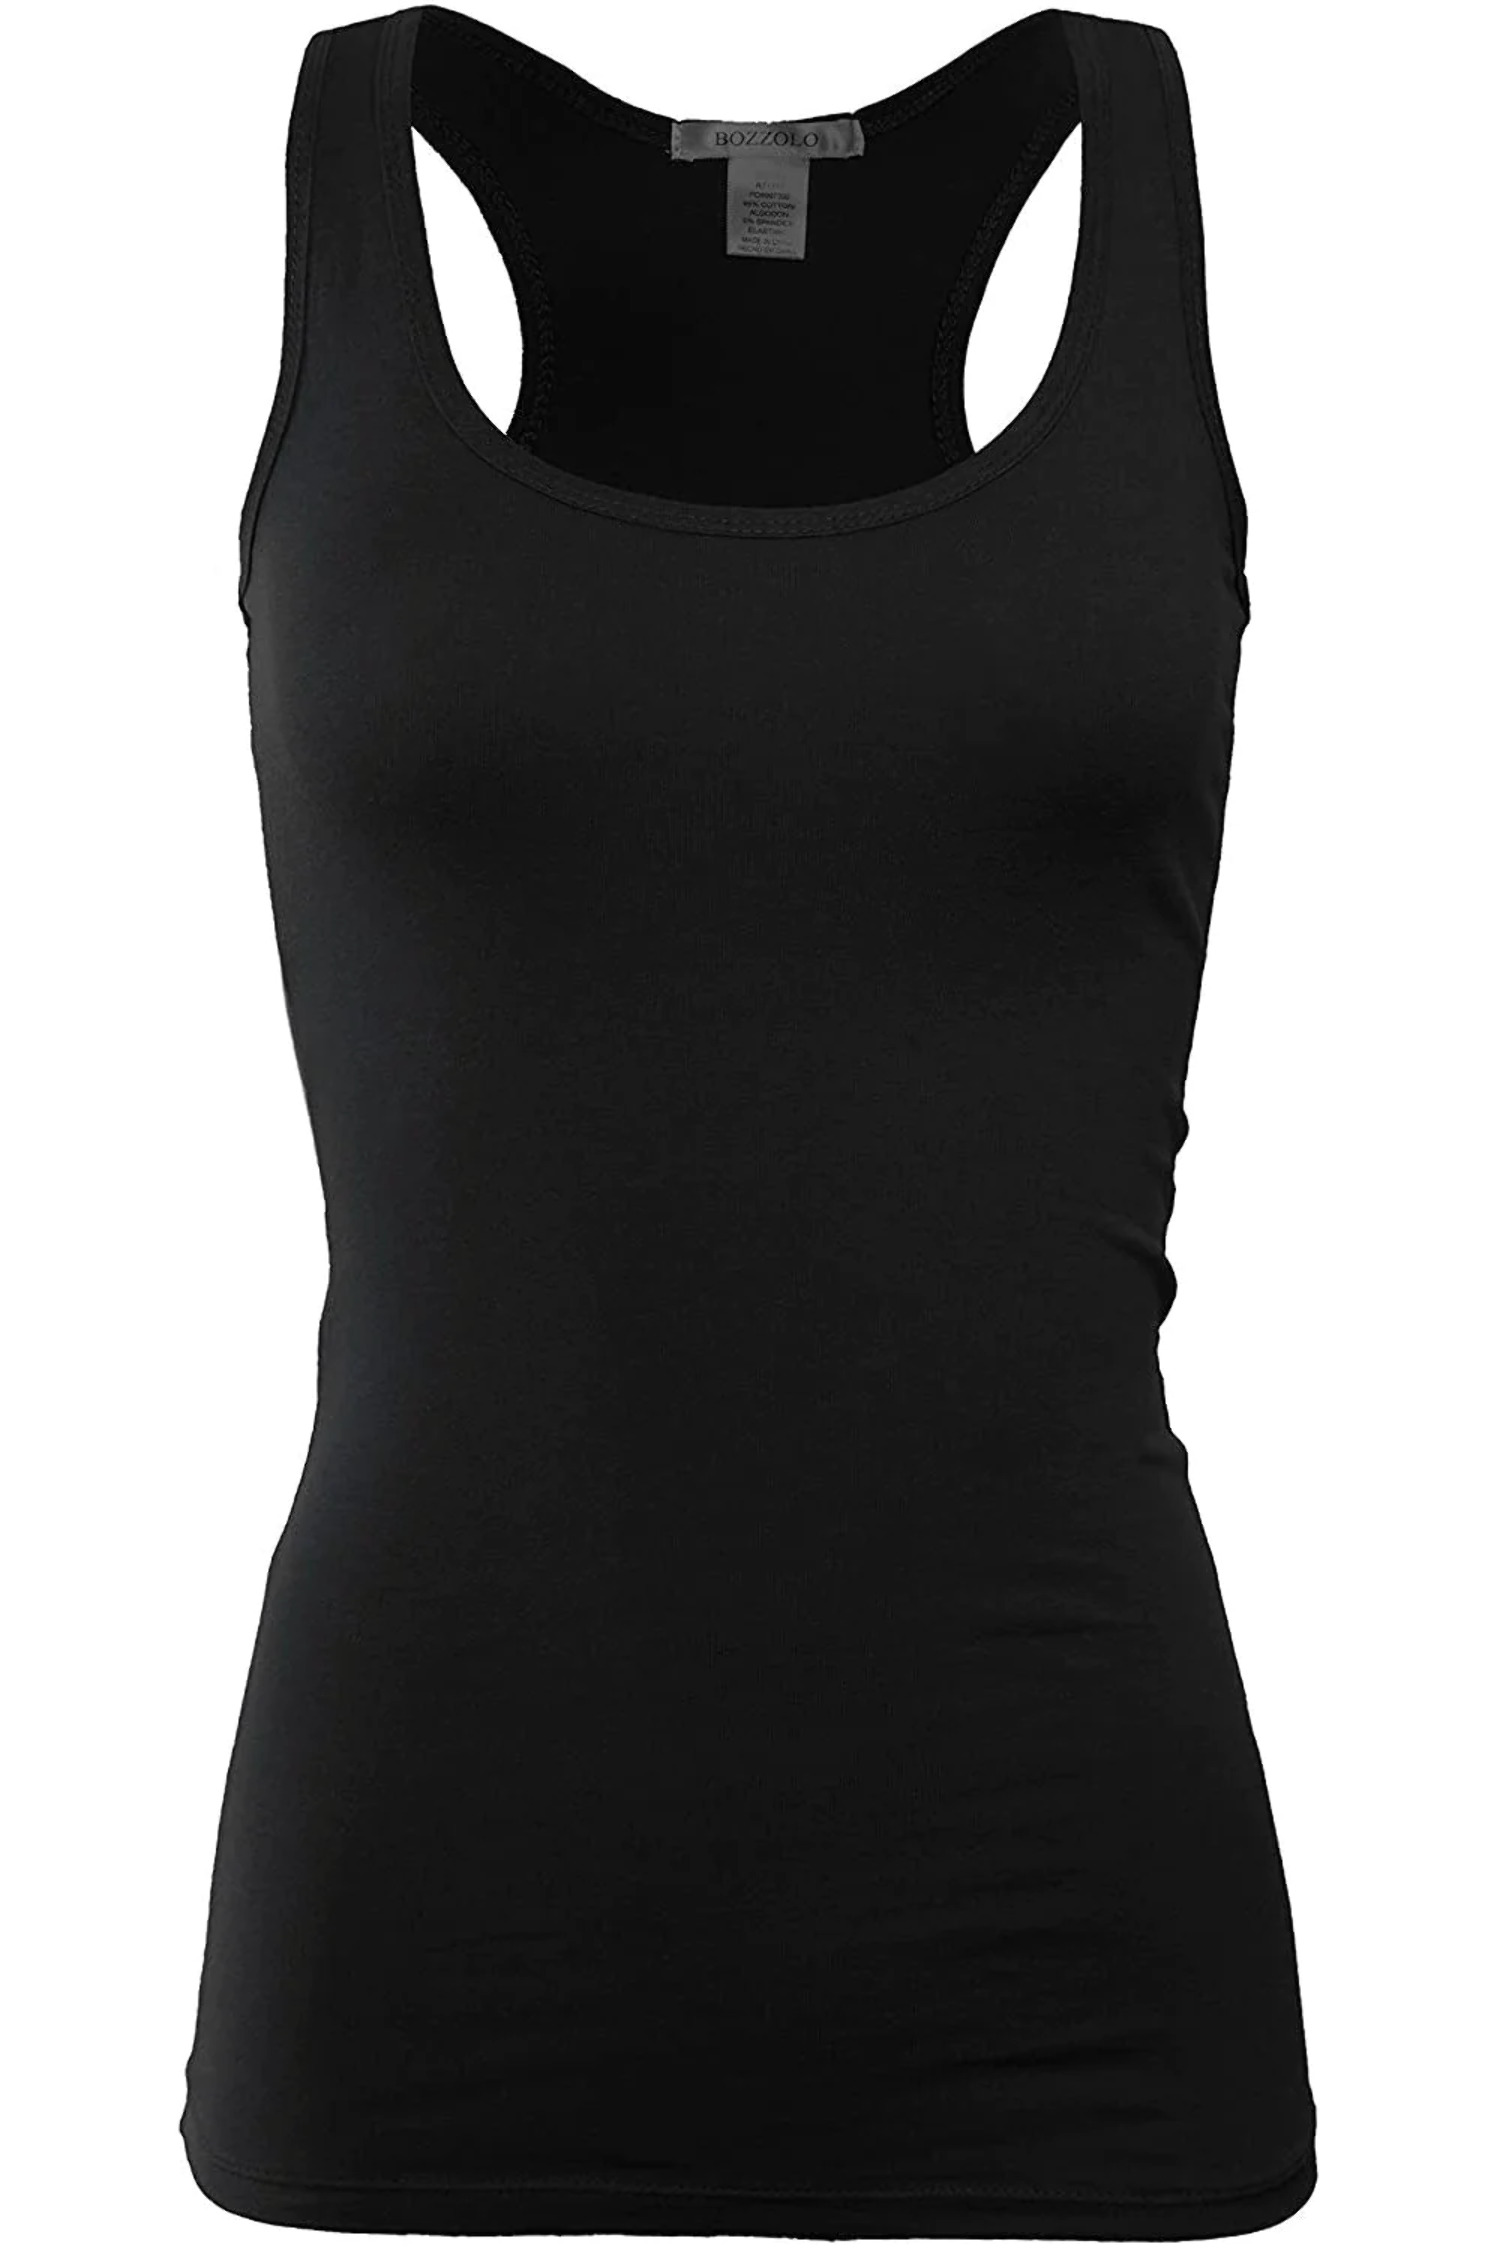 Bozzolo Women's Basic Cotton Spandex Racerback Solid Plain Fitted Tank Top -RT1777 - image 1 of 11